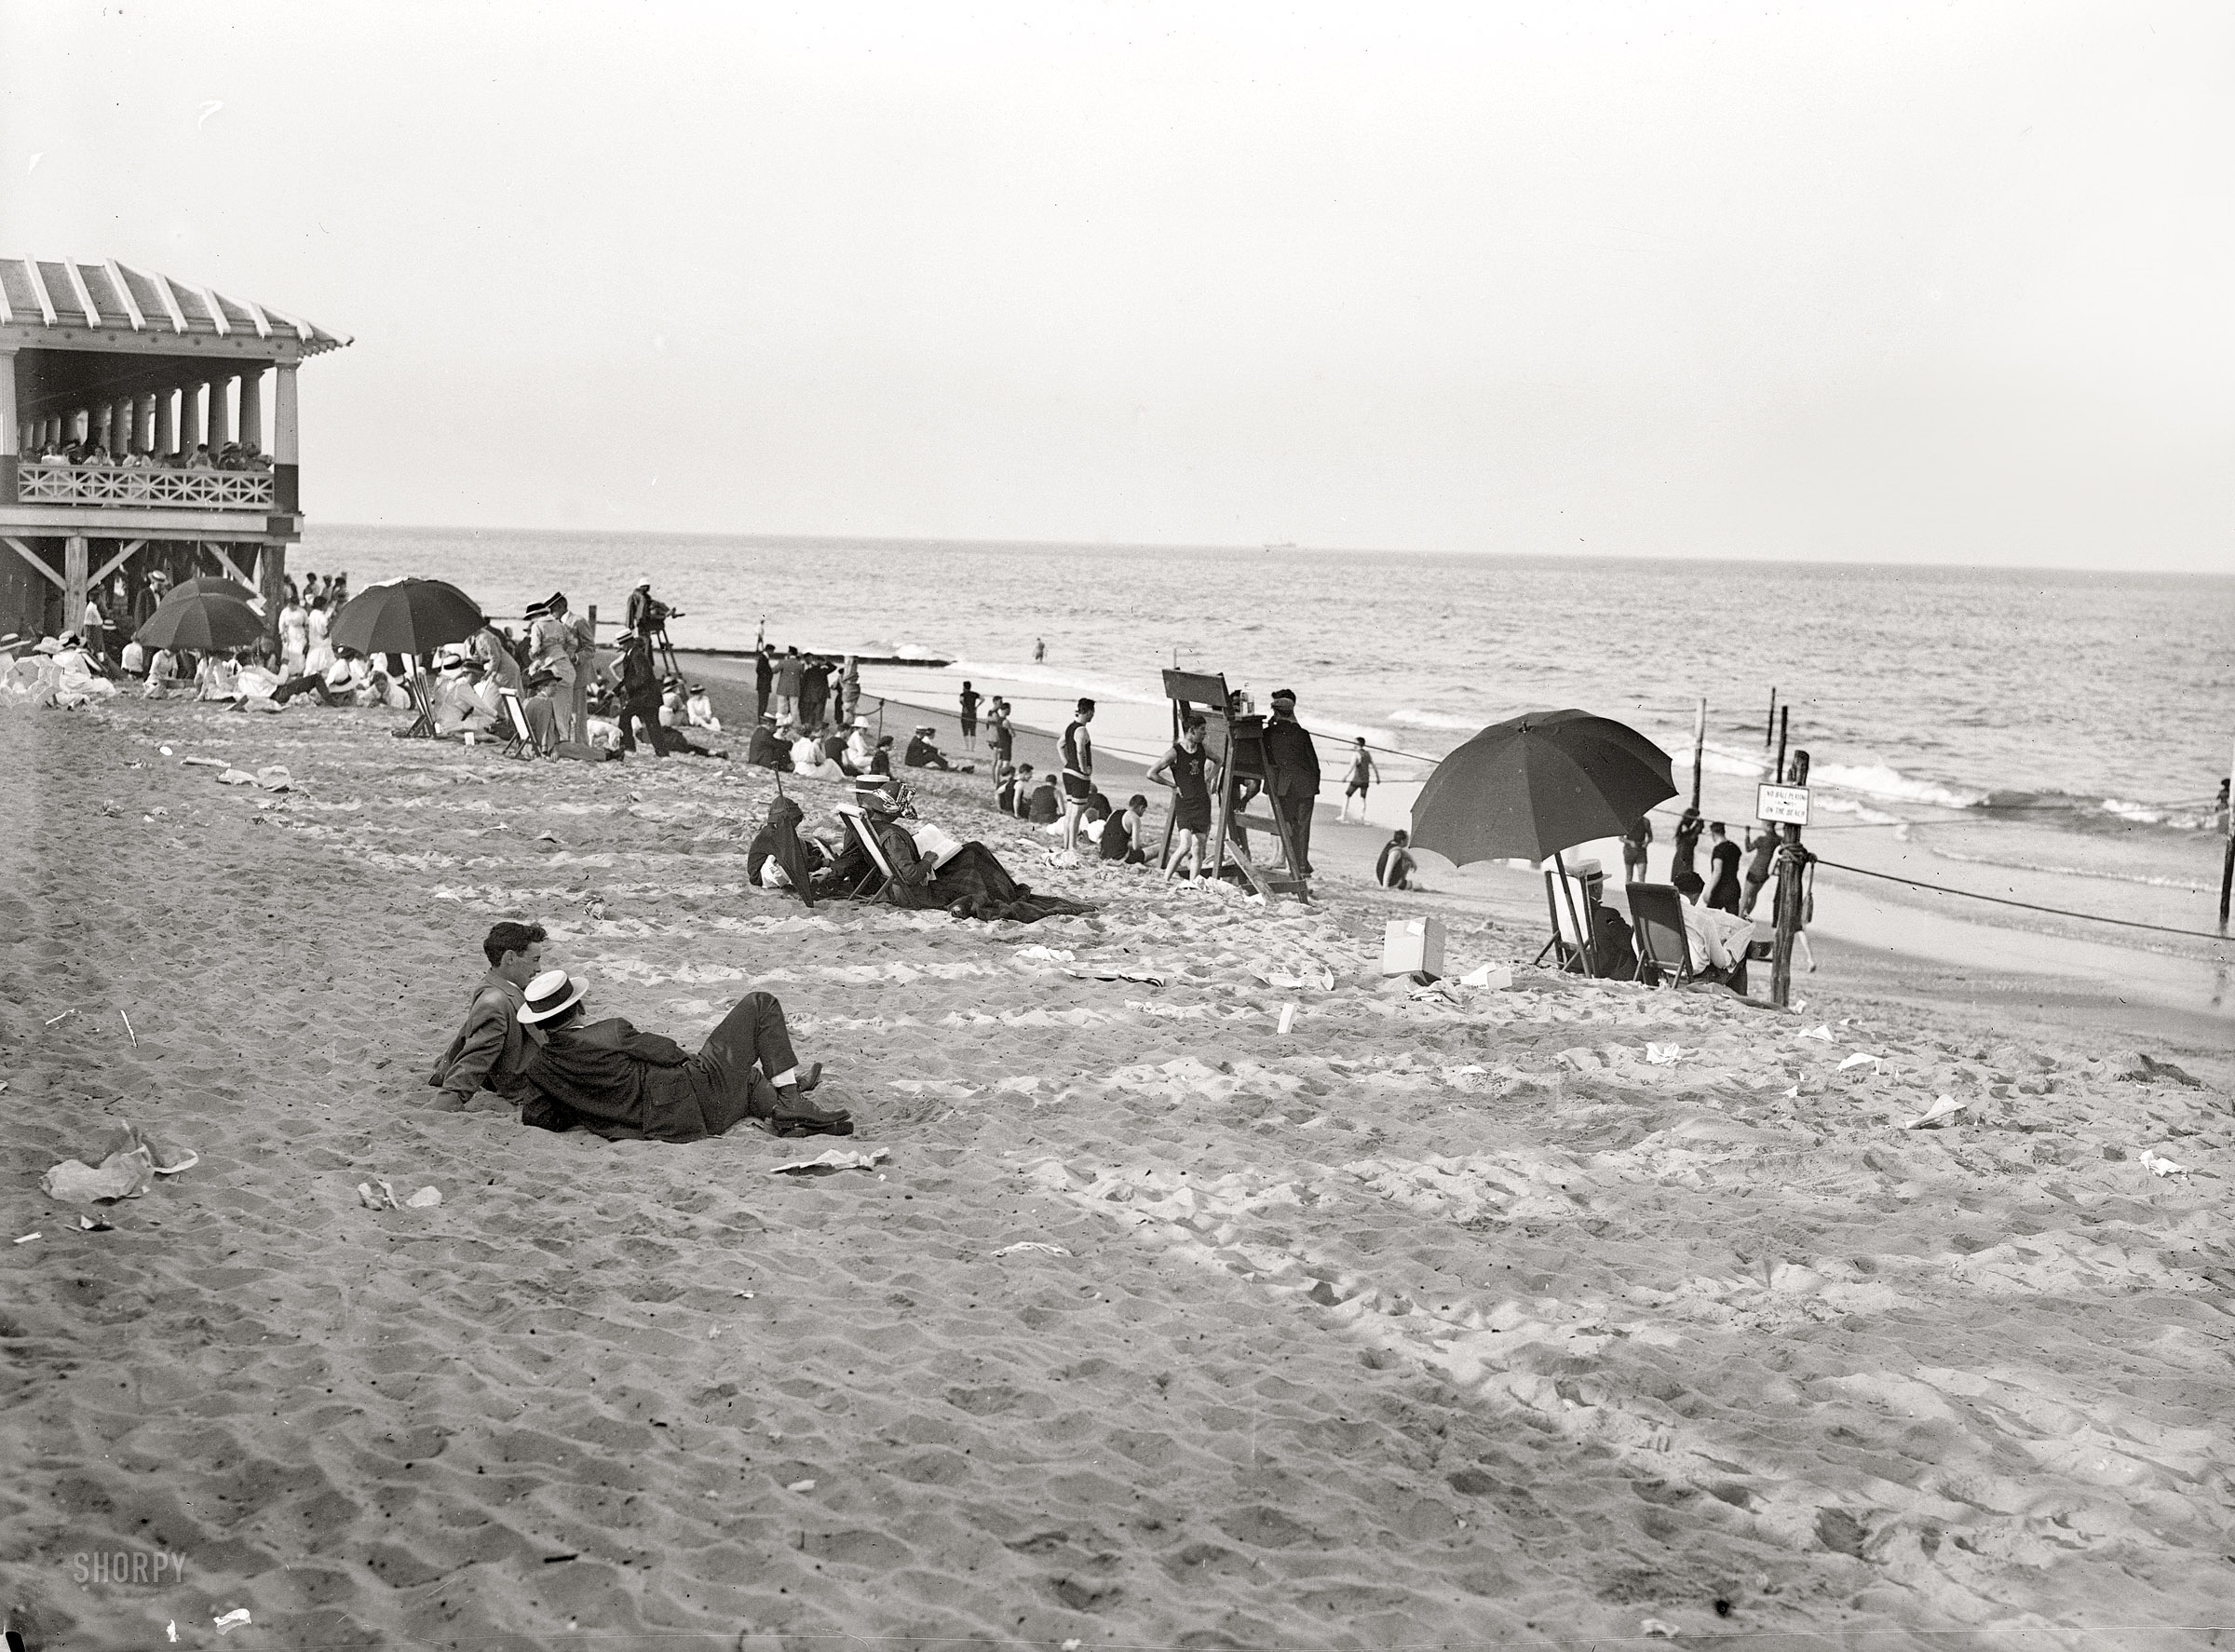 "Asbury Park." The Jersey shore circa 1914. Nothing like a little sand in your shoes. 5x7 glass negative, George Grantham Bain Collection. View full size.